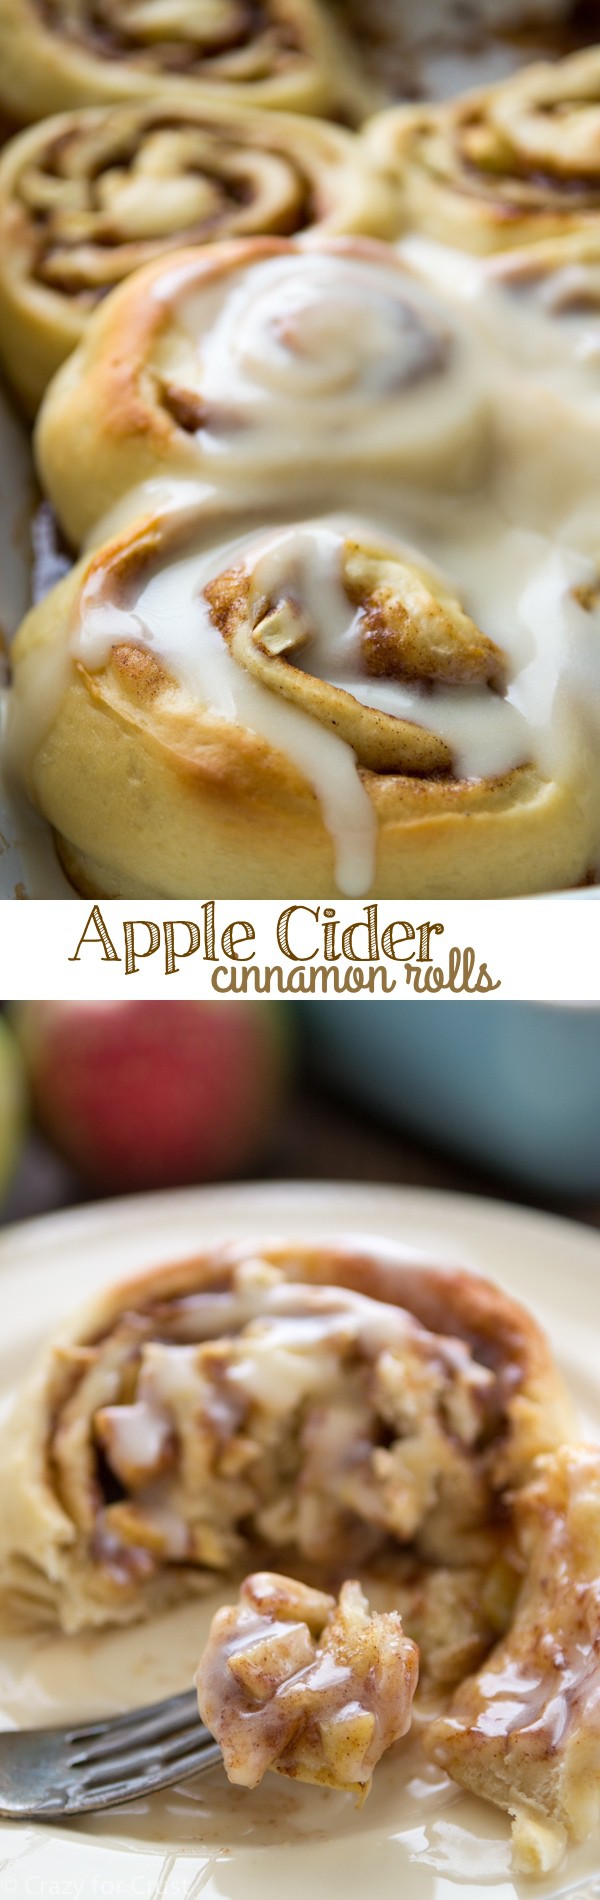 Apple Cider Cinnamon Rolls - apple cider in the dough and the glaze!